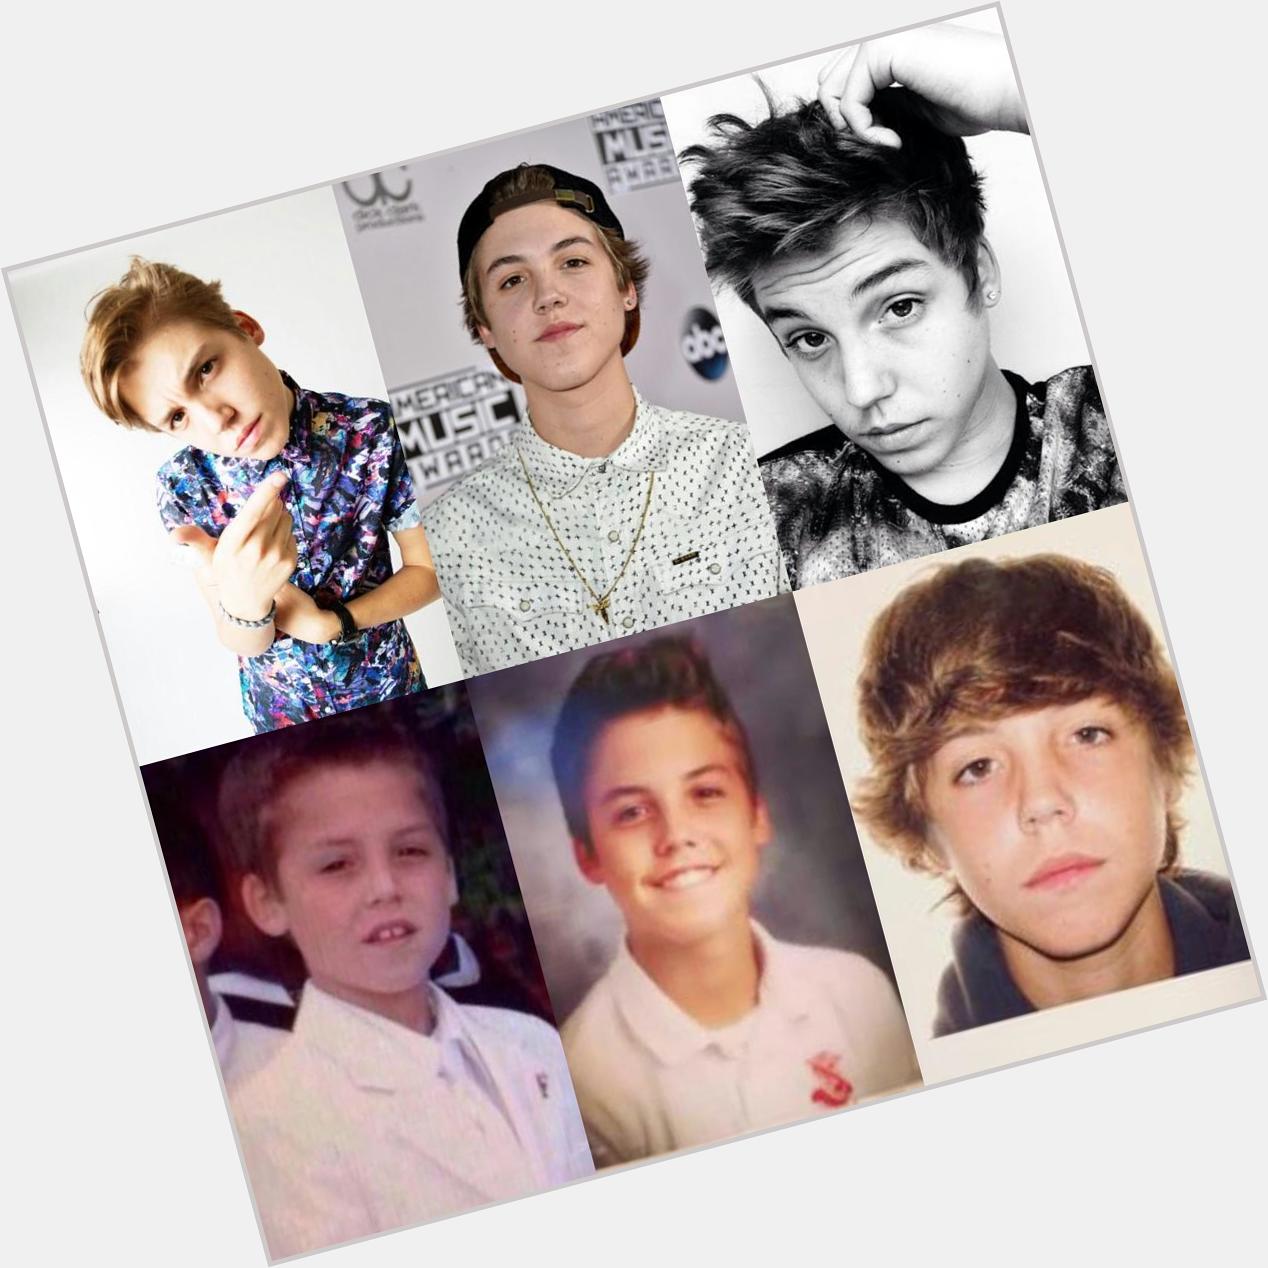 To the funniest dinosaur on earth! Happy 18th birthday Matthew Espinosa! I wish u all the happiness in life. Ilysm! 